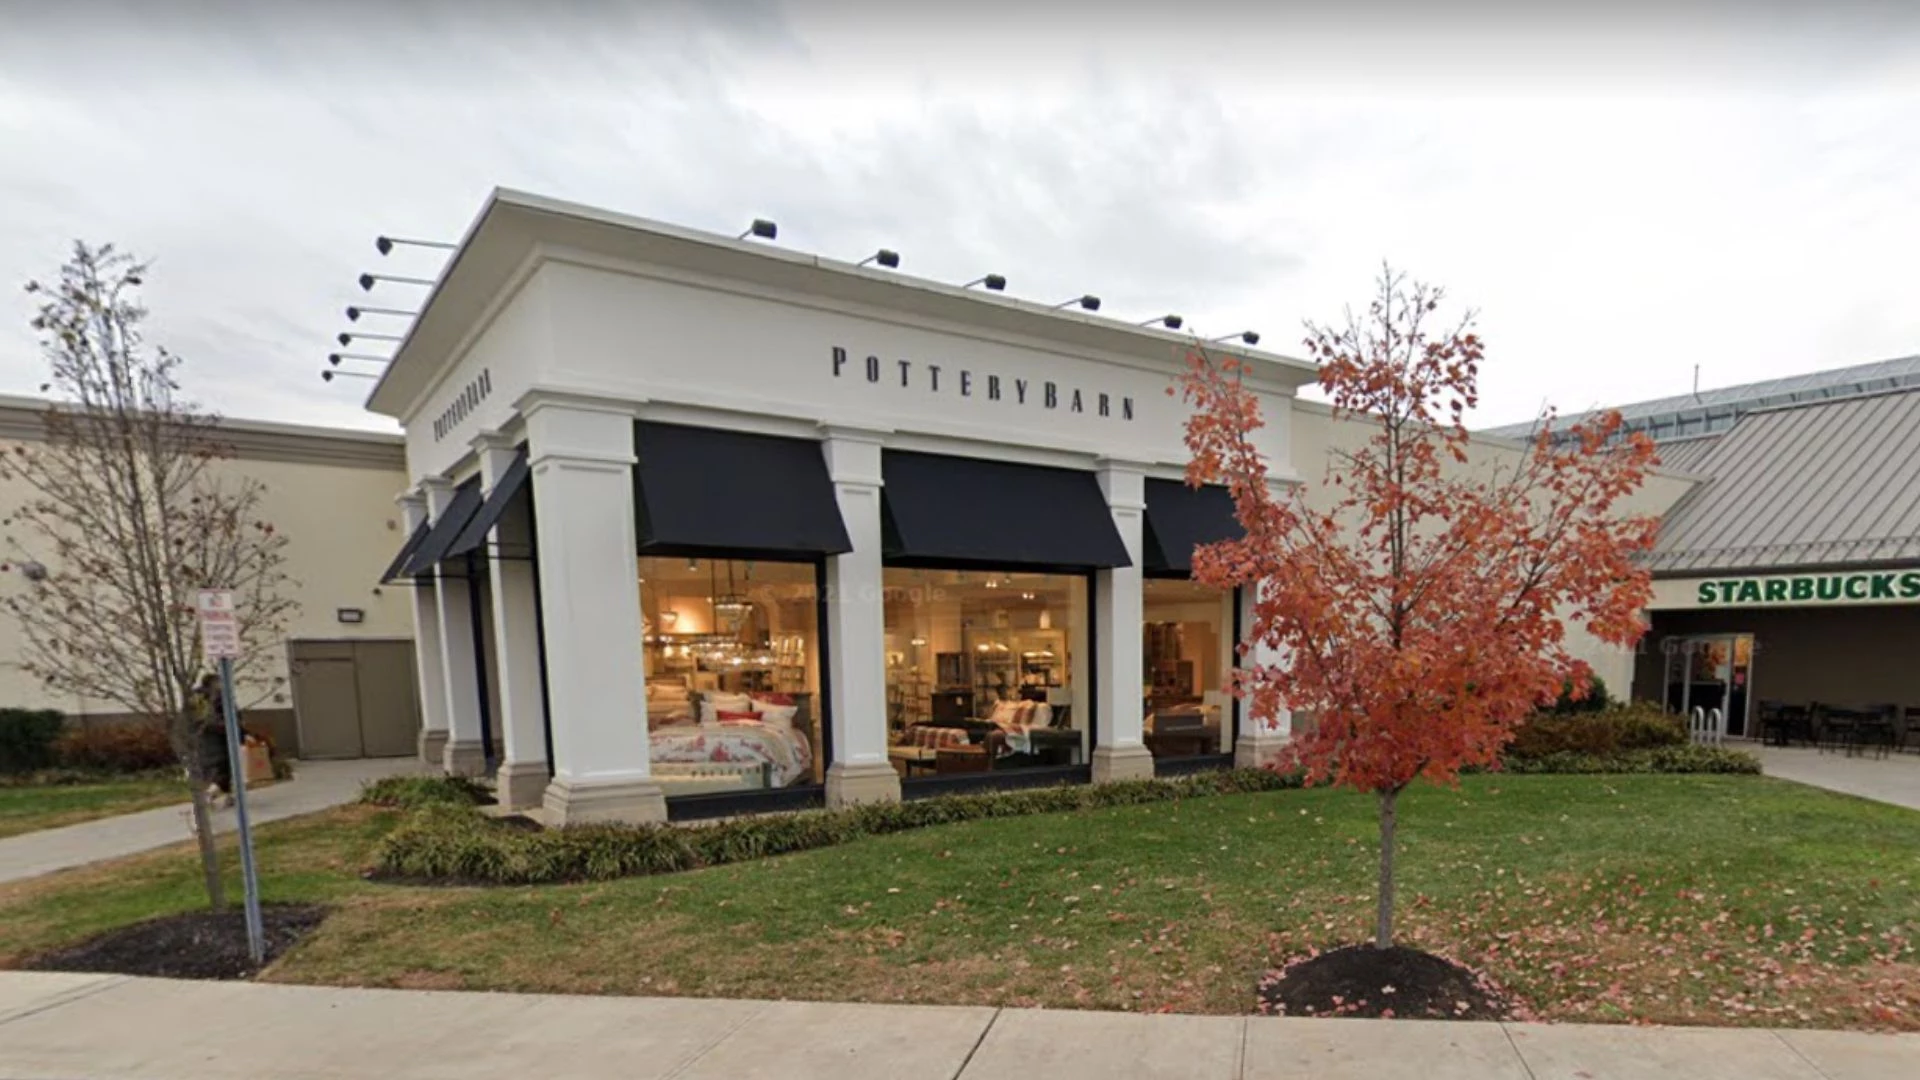 Pottery Barn opens outlet at Northborough Crossing